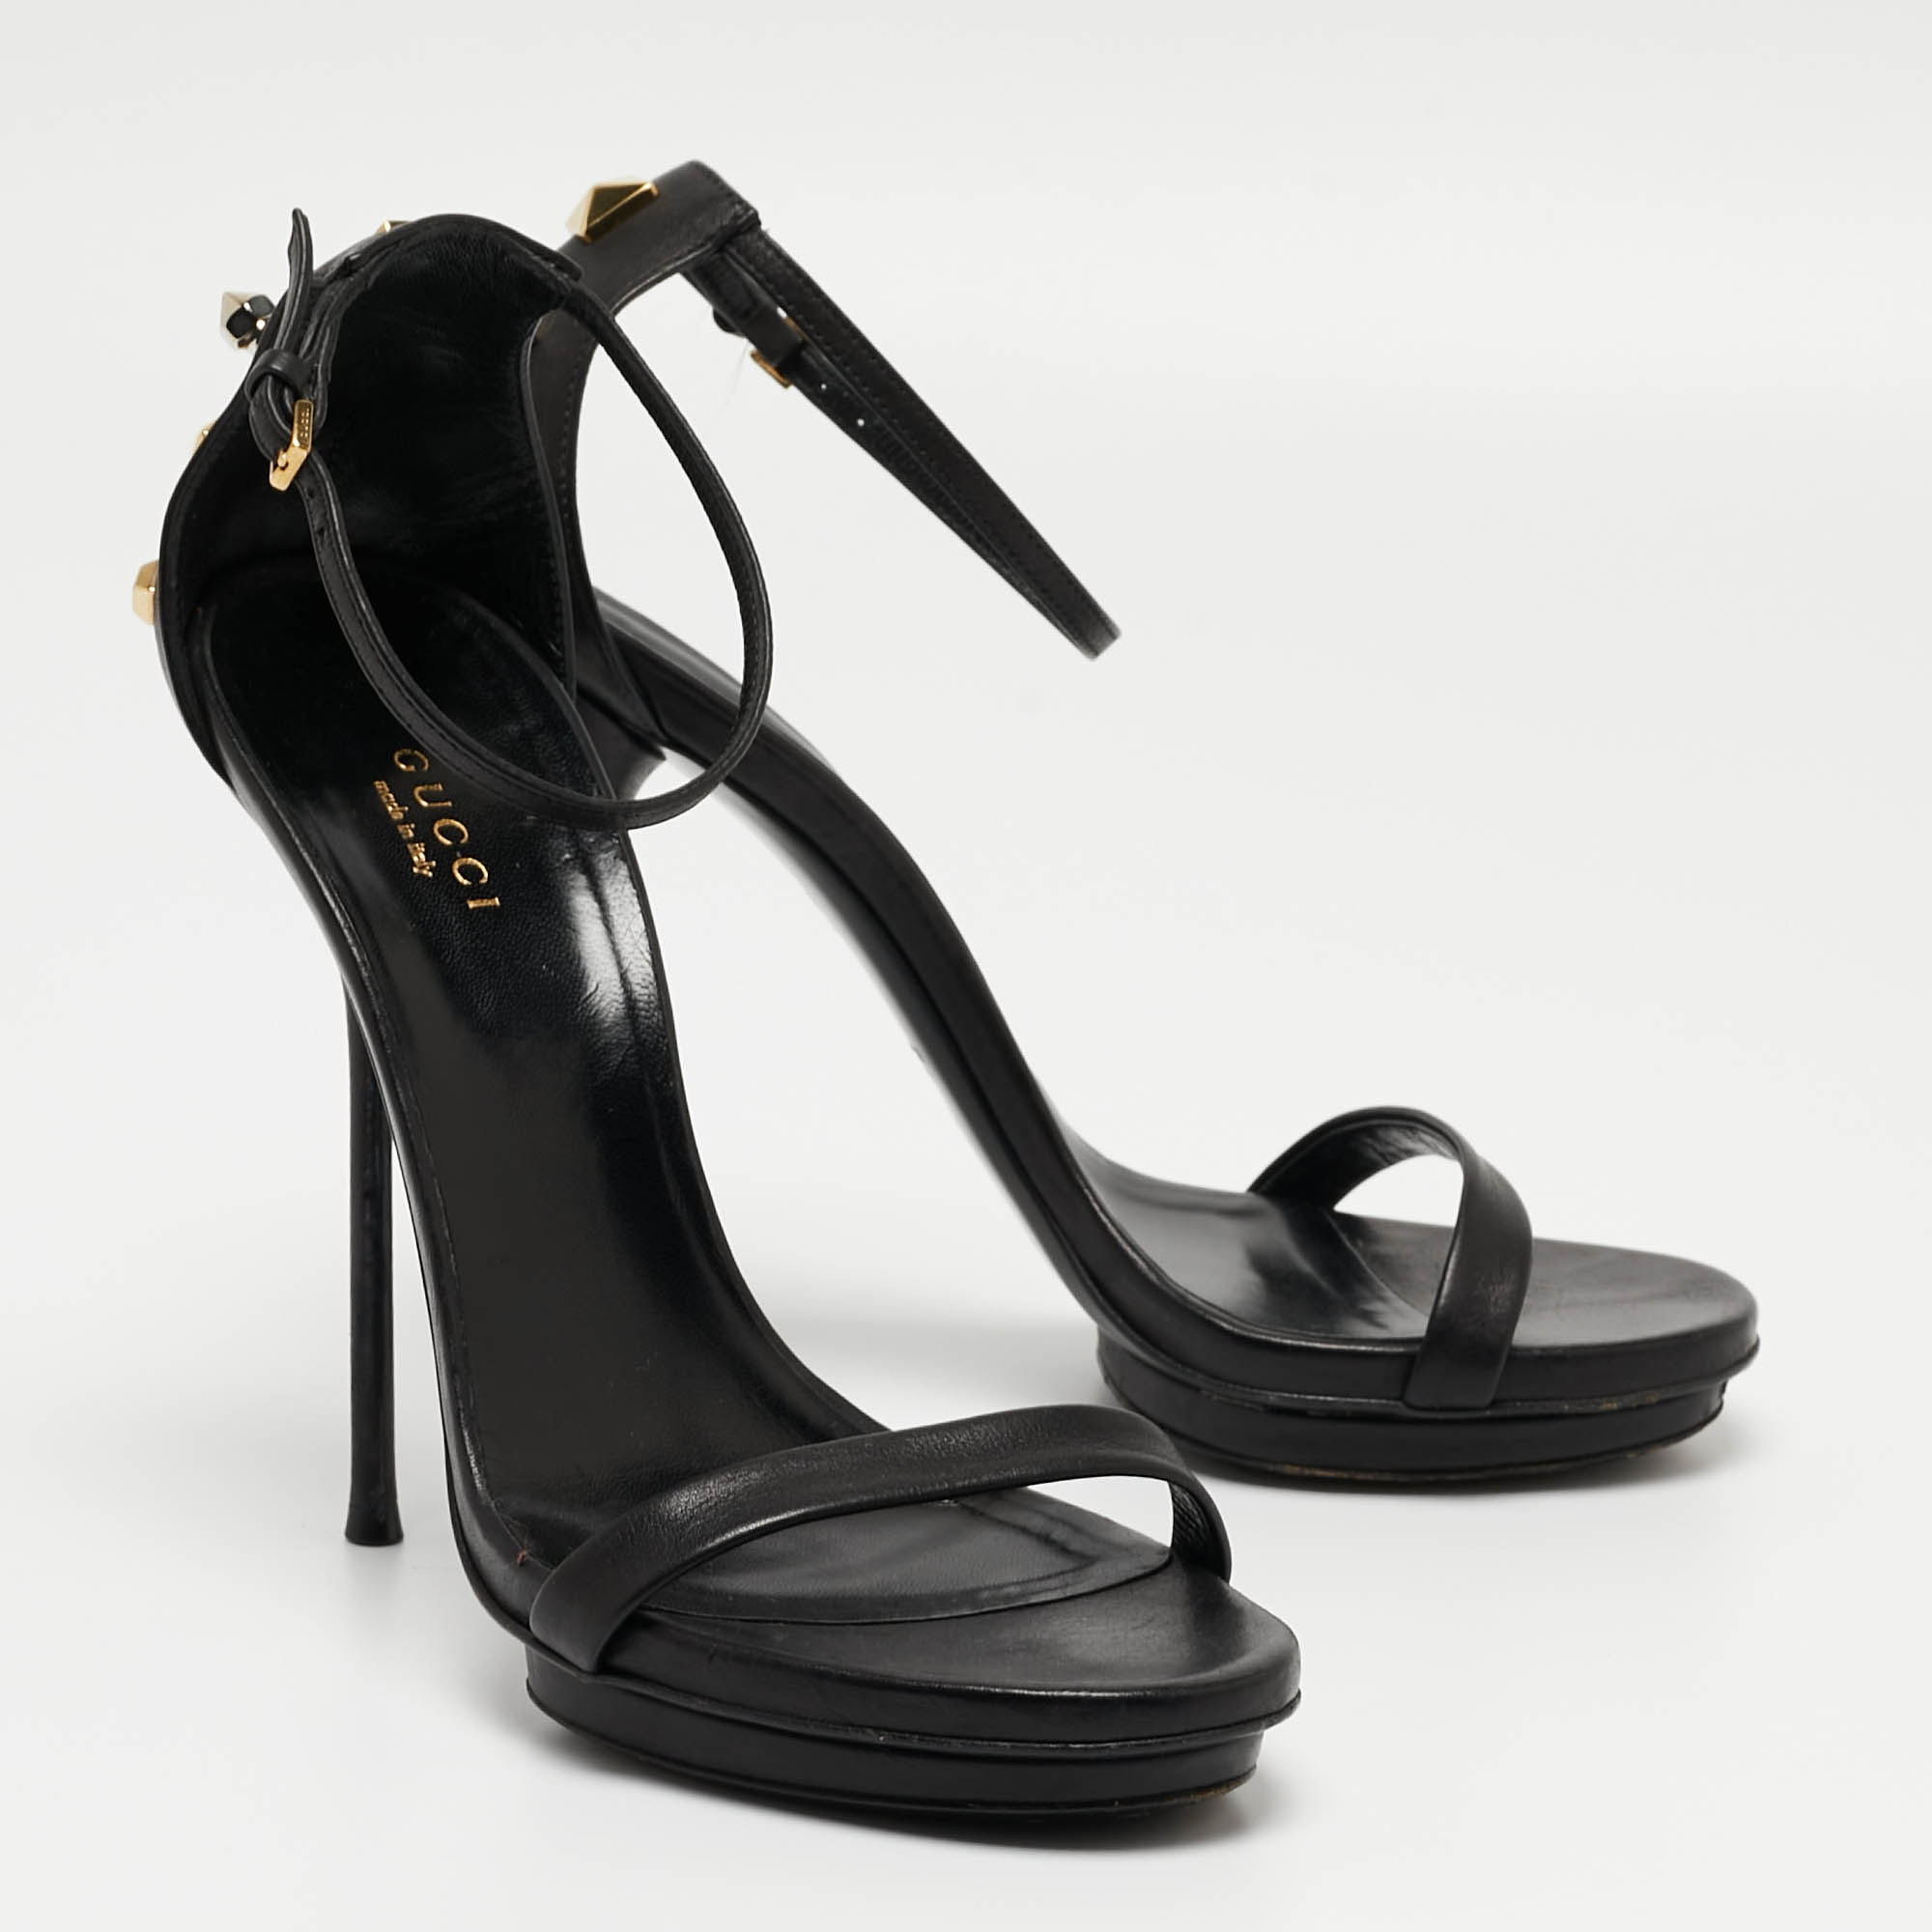 Gucci Black Leather Studded Ankle Strap Sandals Size 38